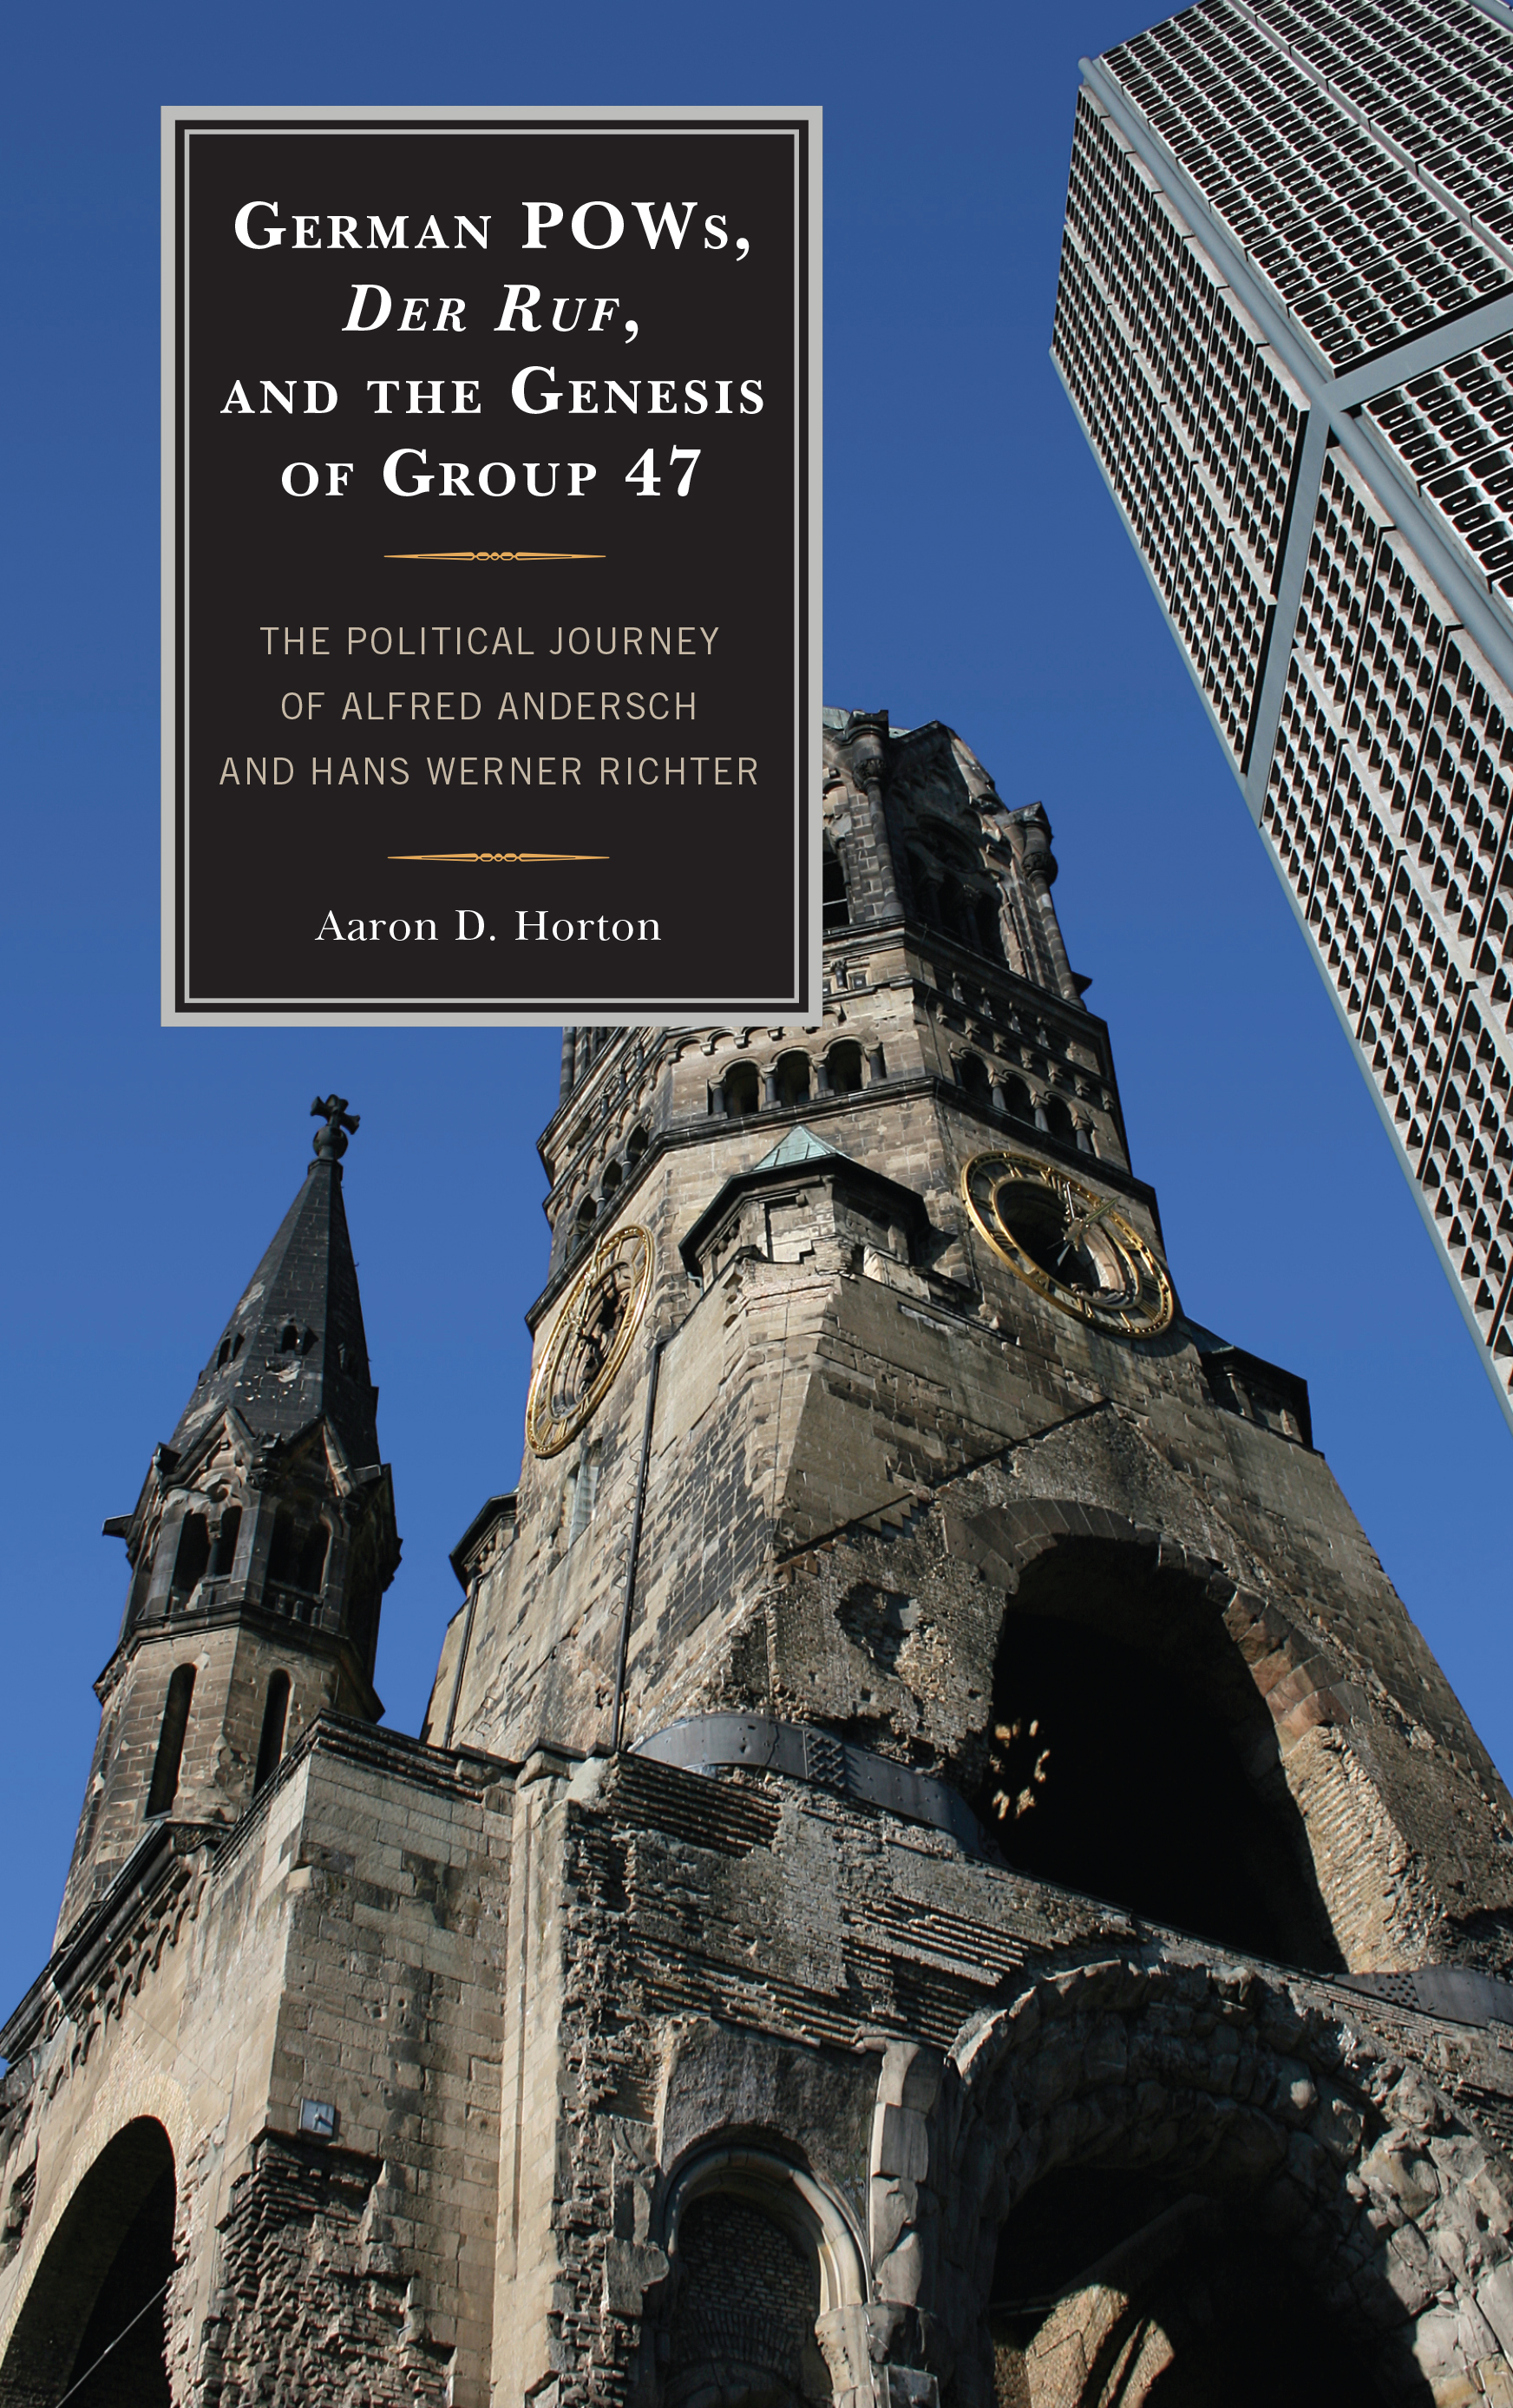 German POWs, Der Ruf, and the Genesis of Group 47: The Political Journey of Alfred Andersch and Hans Werner Richter